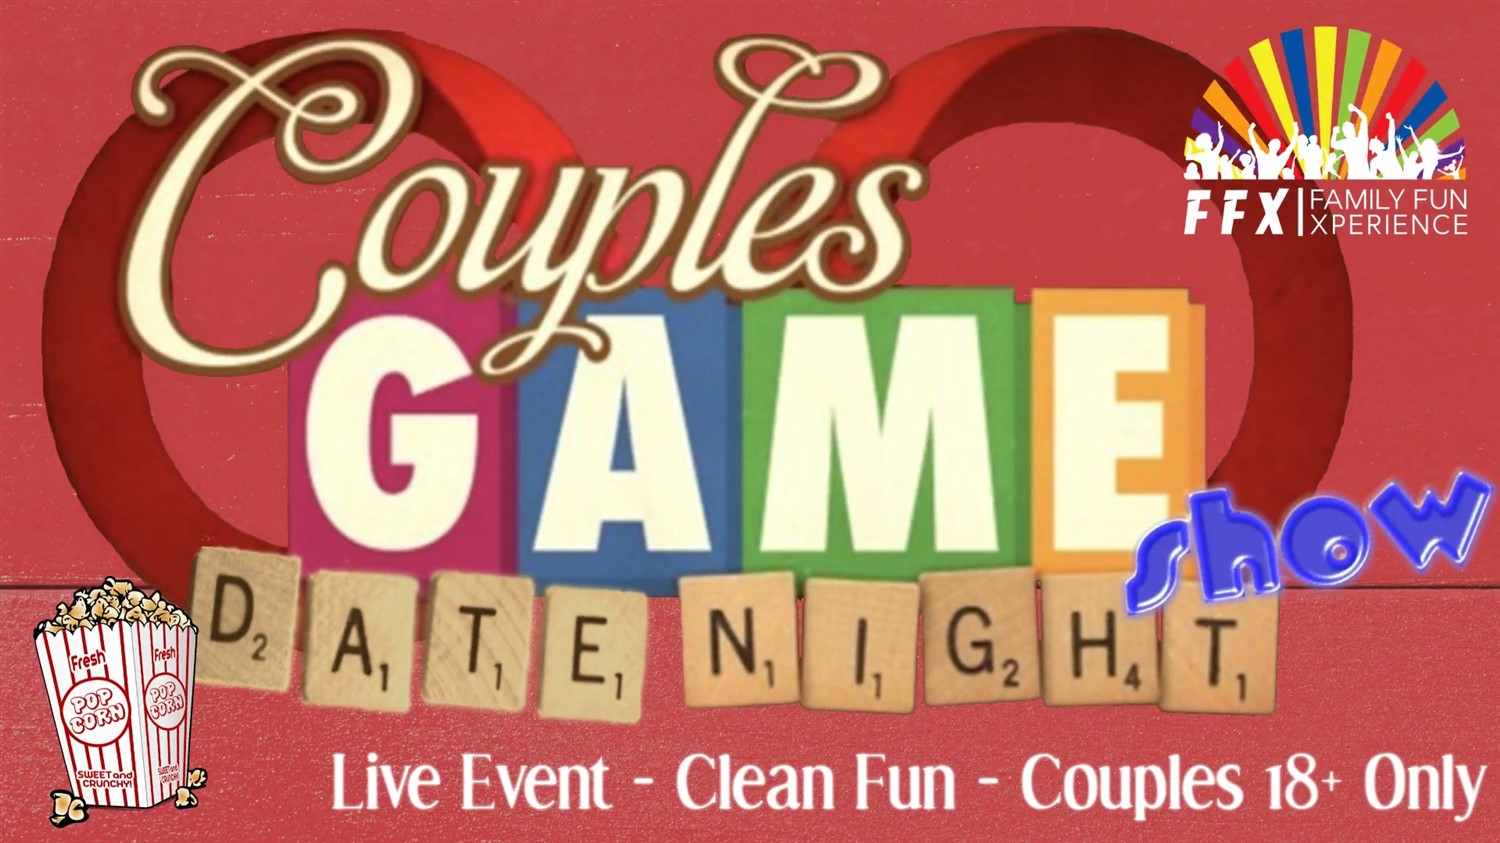 Couples Date Night Game Show! Live Game Show - Couples Only - Date Night FUN! on Jul 14, 19:00@FFX Theatre - Pick a seat, Buy tickets and Get information on Family Fun Xperience tickets.ffxshow.org